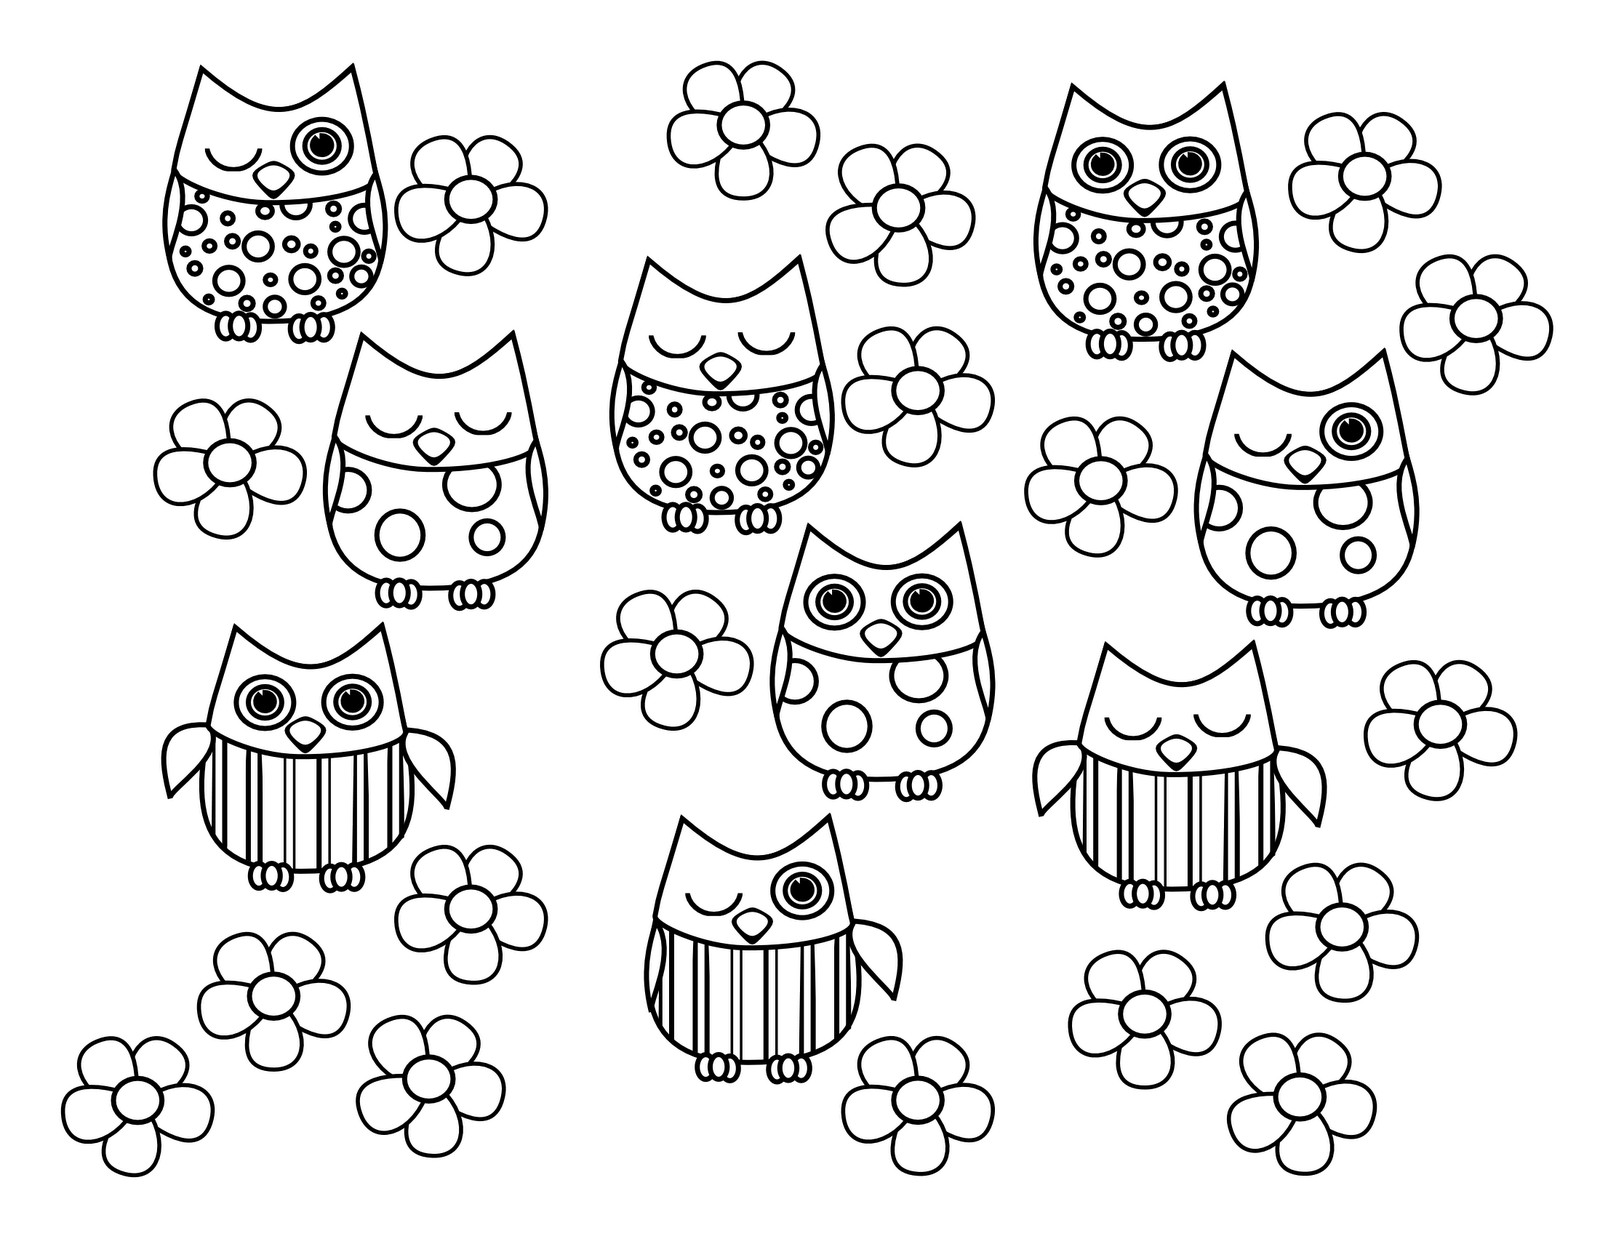 Cute Baby Owl Coloring Pages
 Owl Coloring Page Bird 10 Image – Colorings